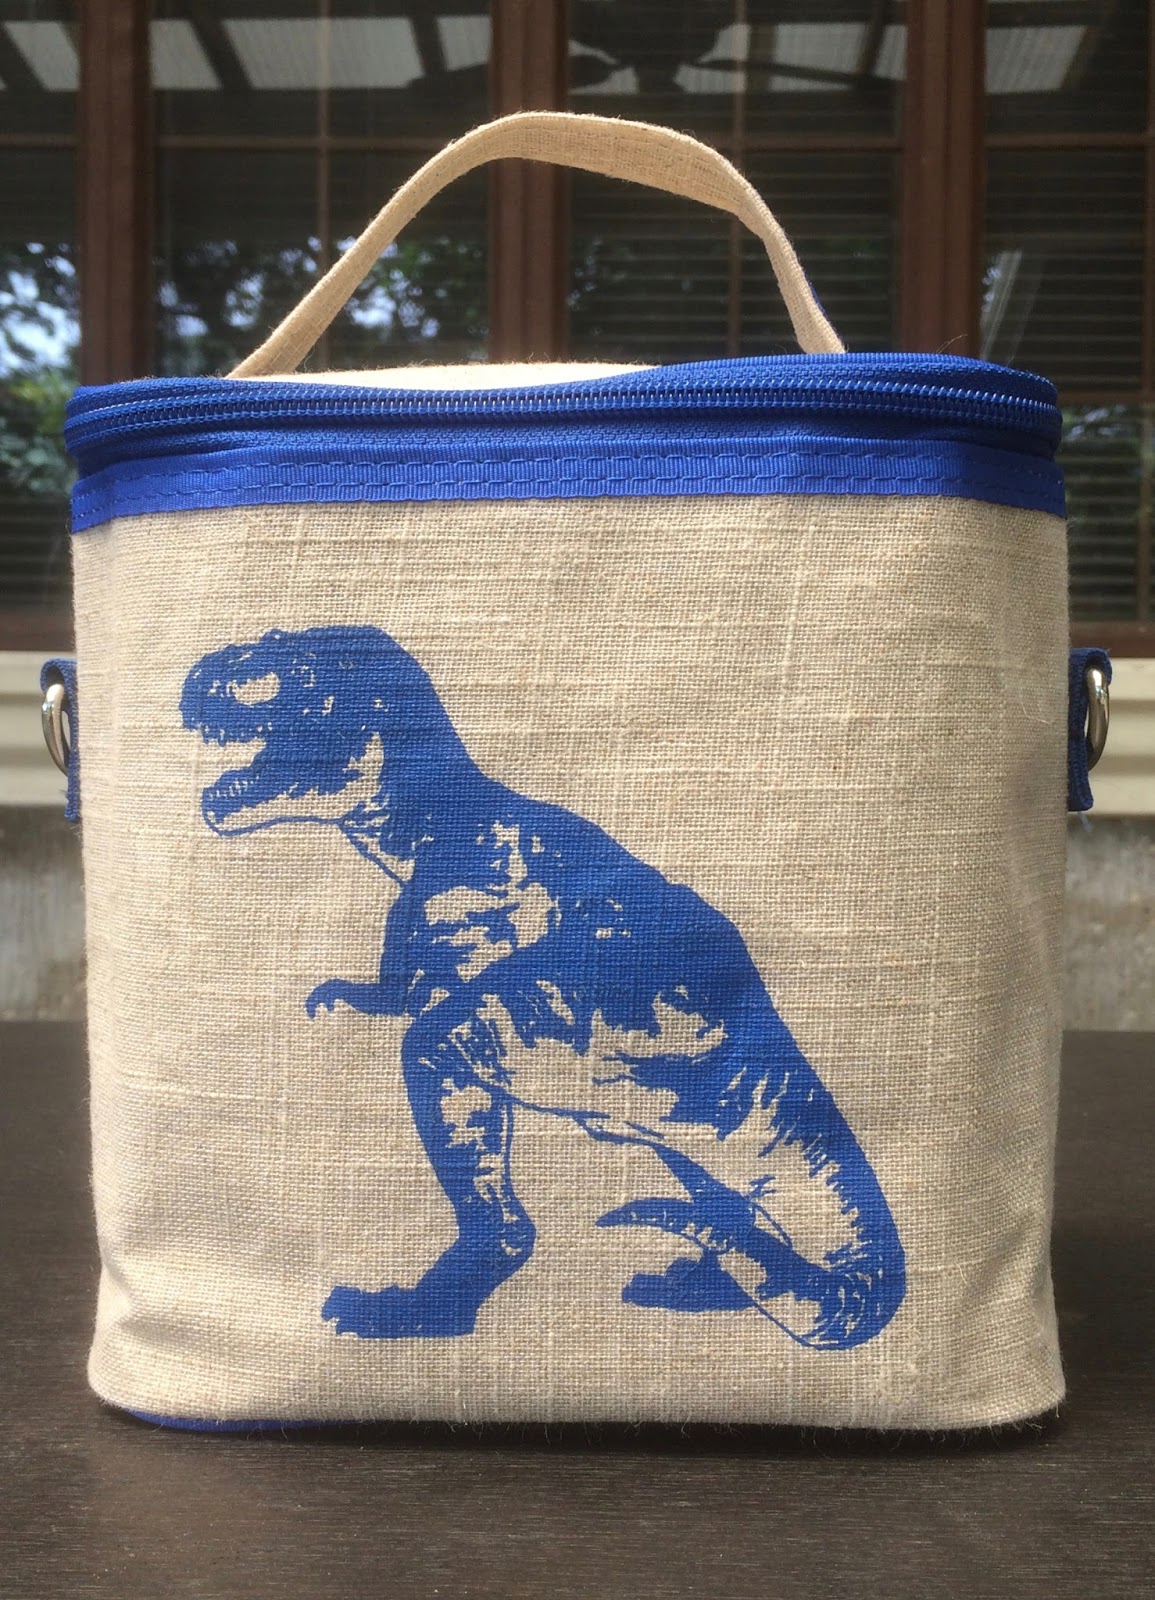 So Young Blue Dinosaur Lunch Box